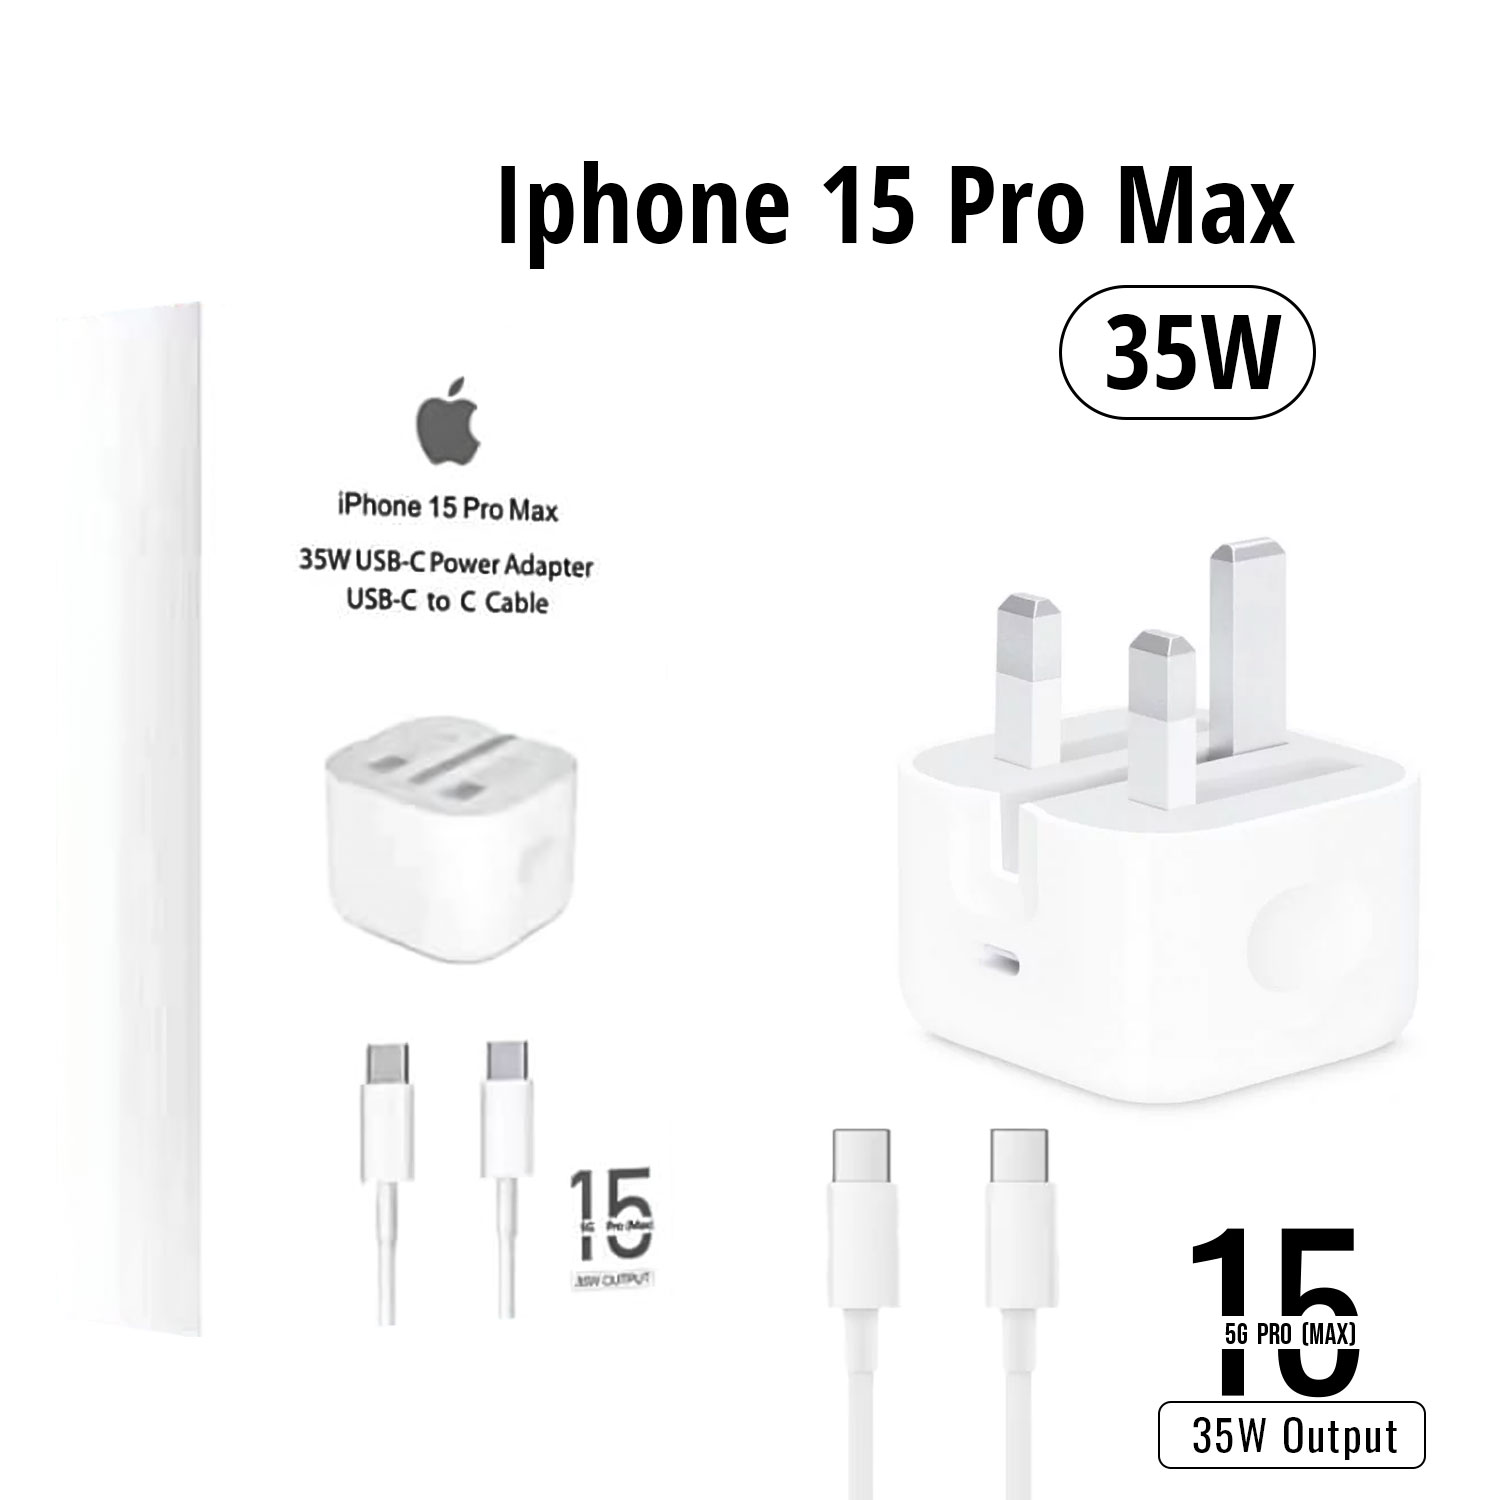 iphone_15_pro_max_3_pin_uk_pin_35w_usb-c_power_adapter_with_usb-c_to_c_cable1705662148.jpg